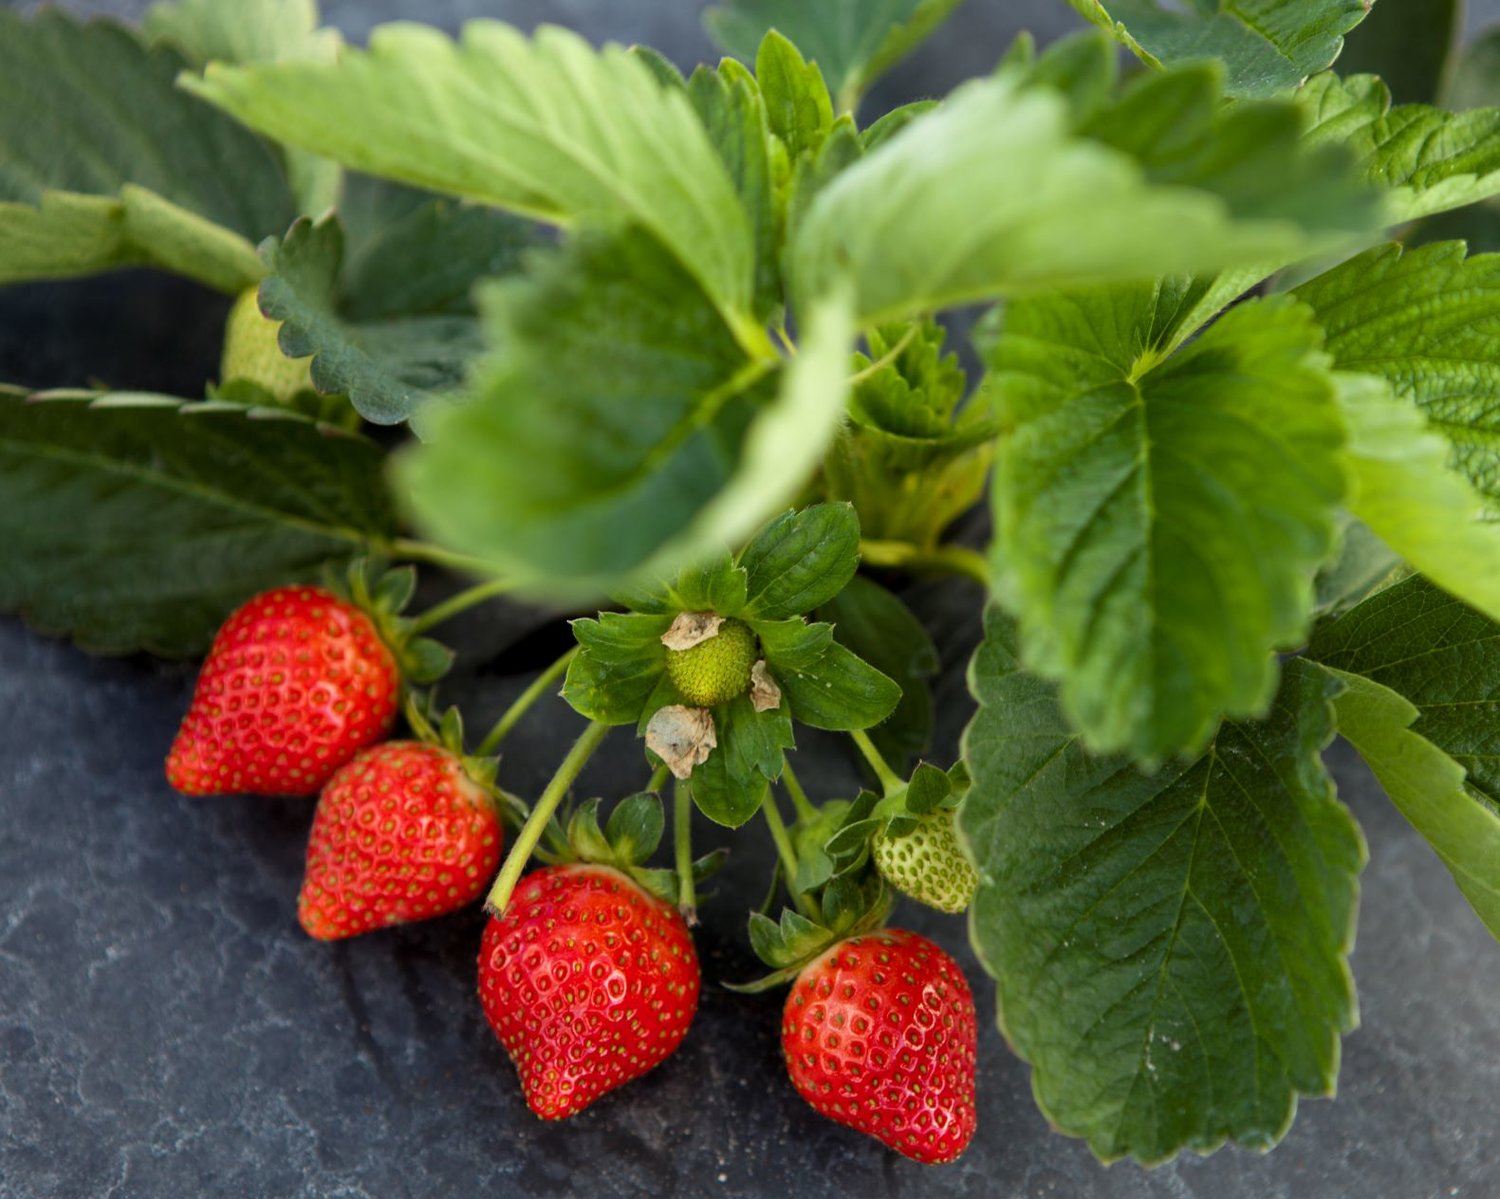 Strawberries growing in plasticulture at the UF/IFAS Gulf Coast Research and Education Center in Balm, Florida.